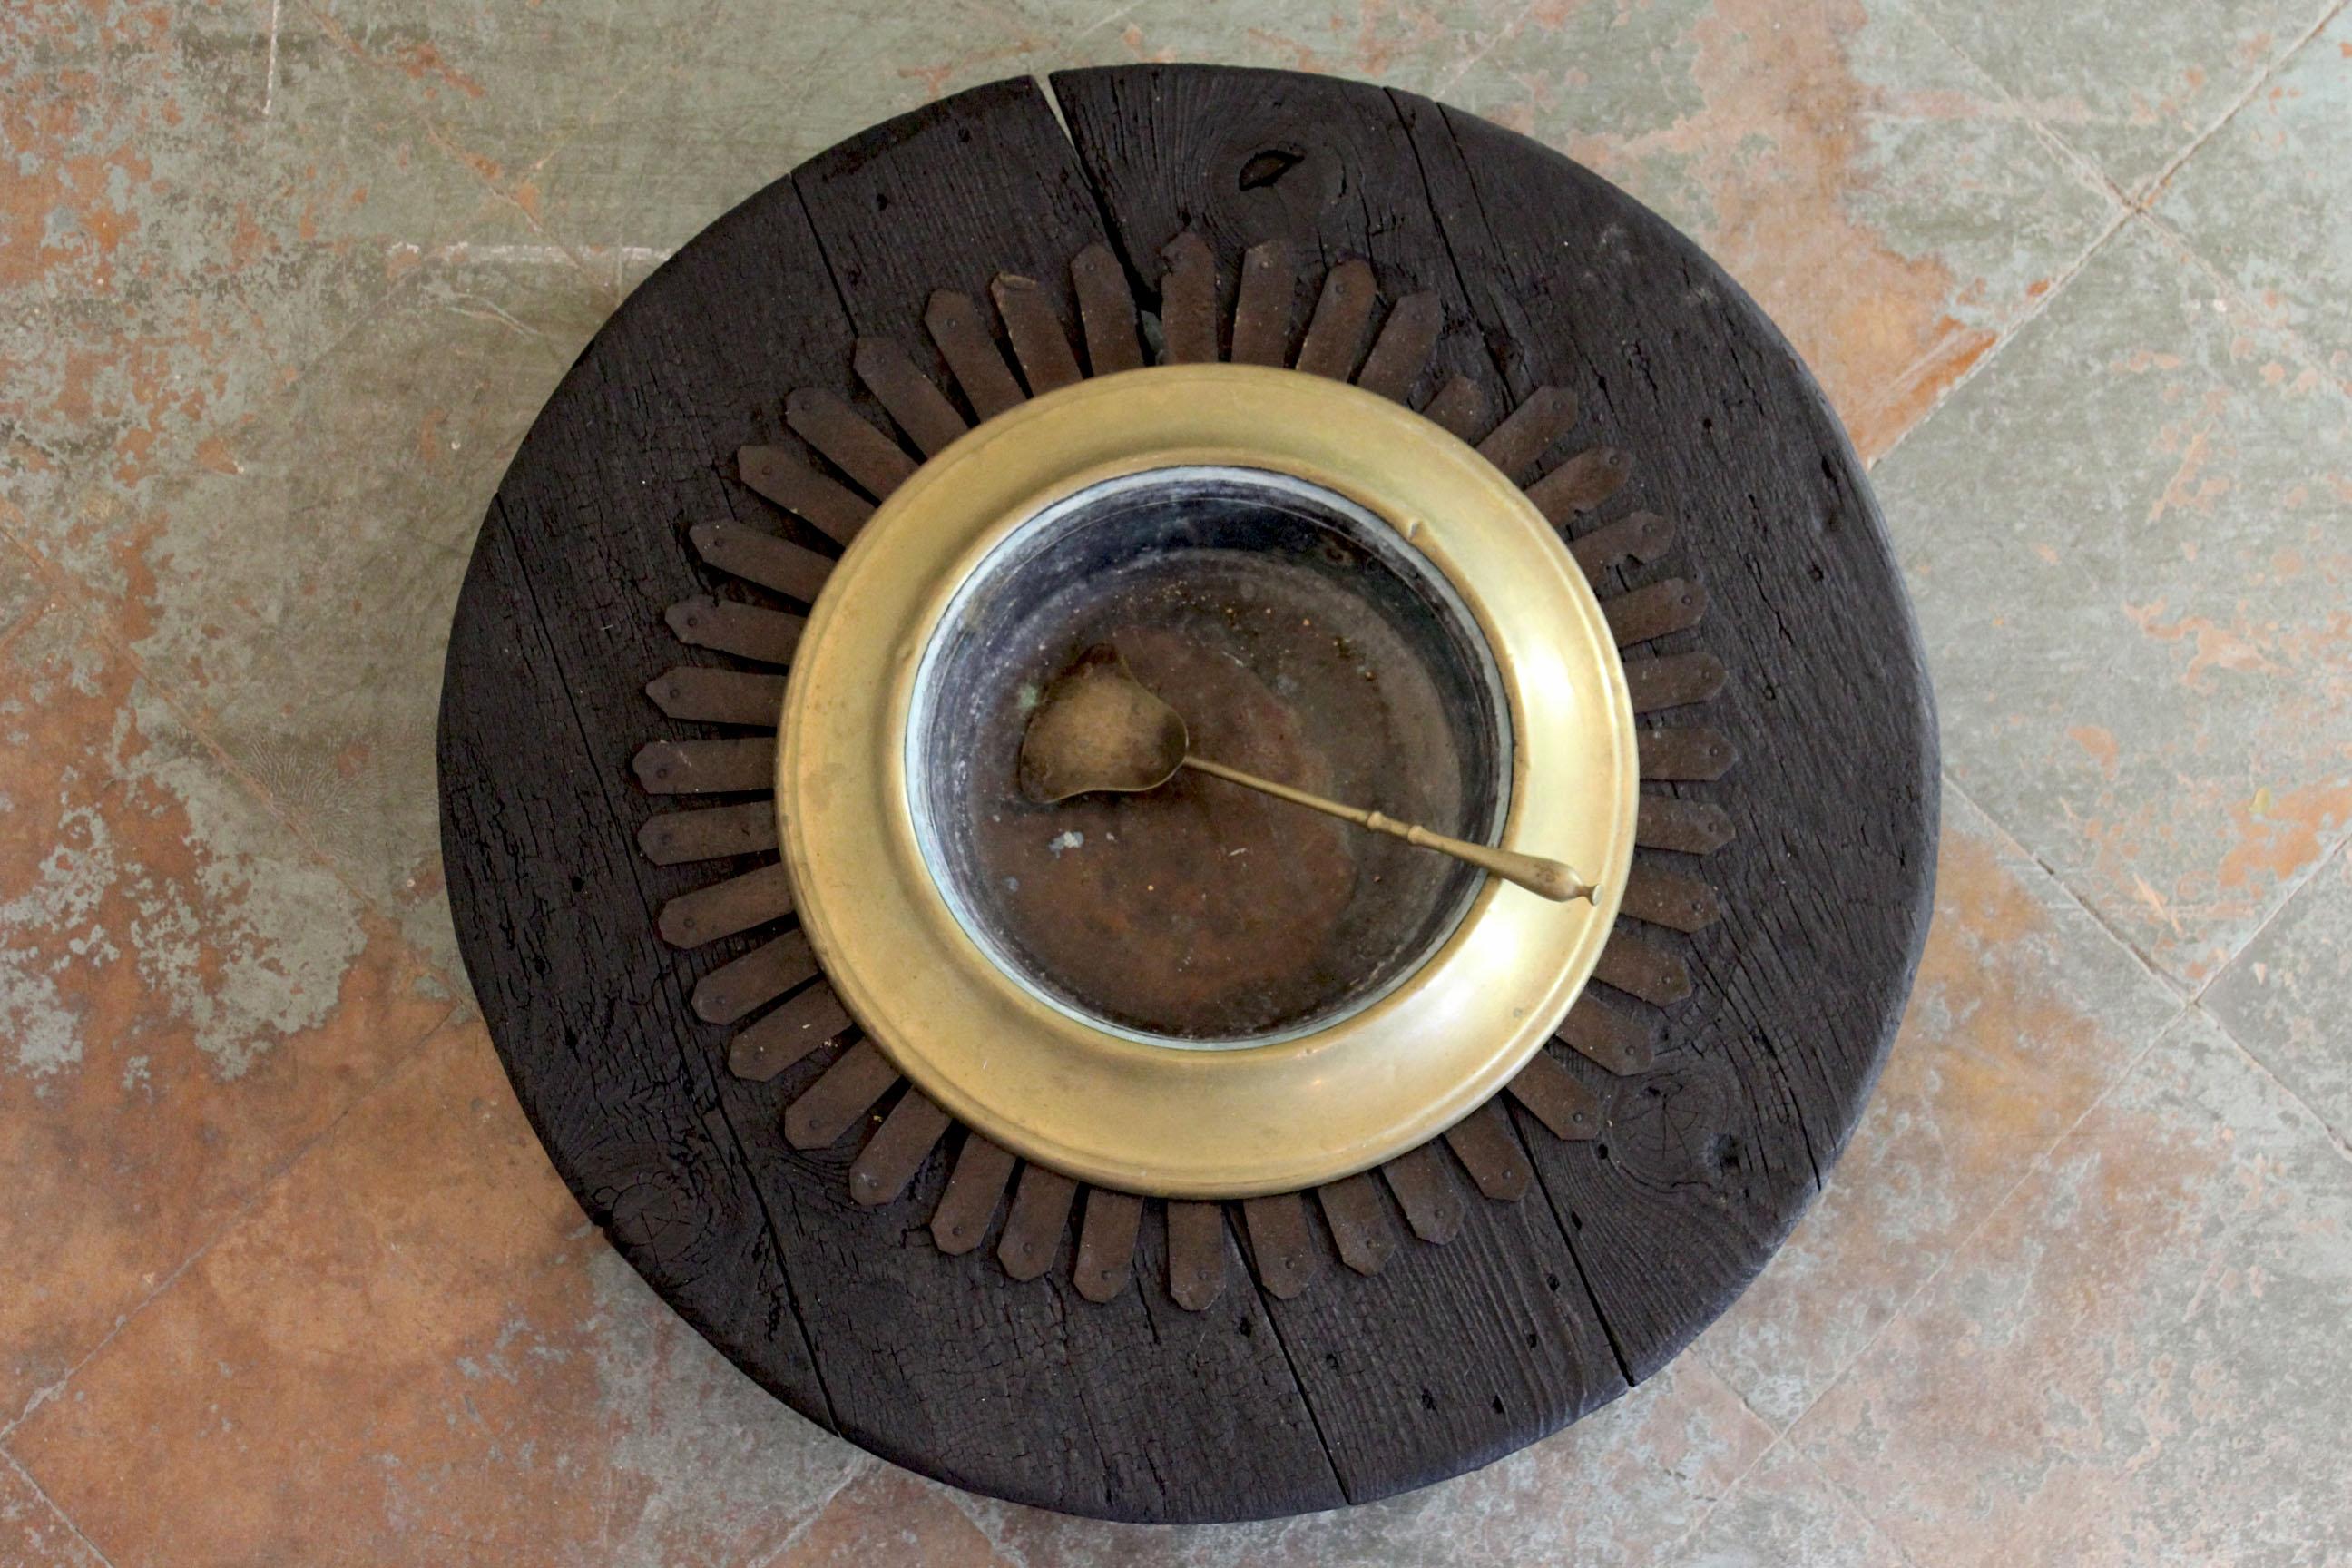 Antique brass brazier restyled by using minimal yakisugi technique (carbonized wood process typical of Japanese culture used in order to preserve wood). It can also be used as flowerpot dish.